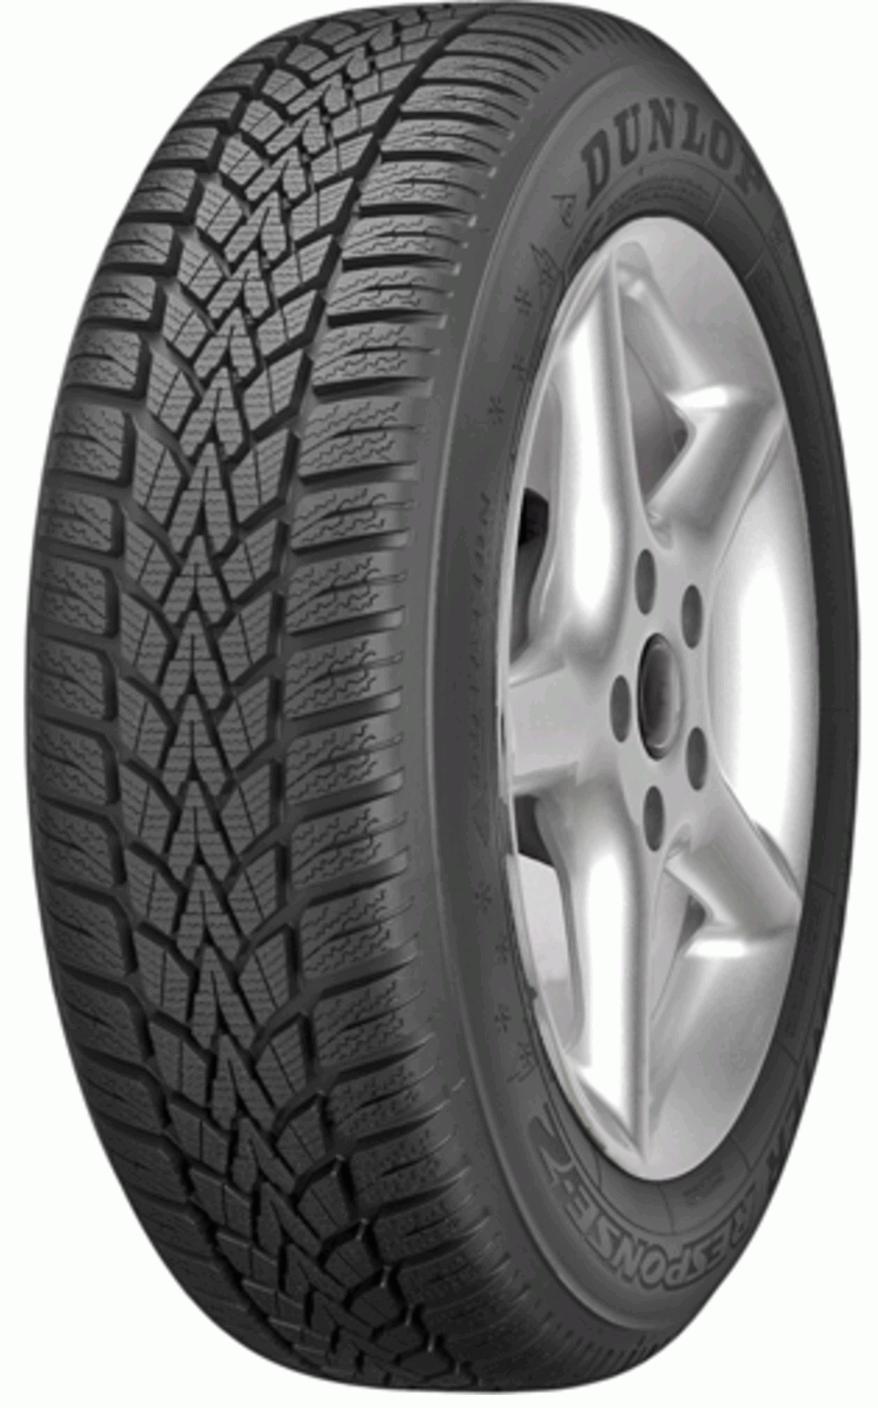 Dunlop Winter Response 2 Tests Reviews and - Tyre